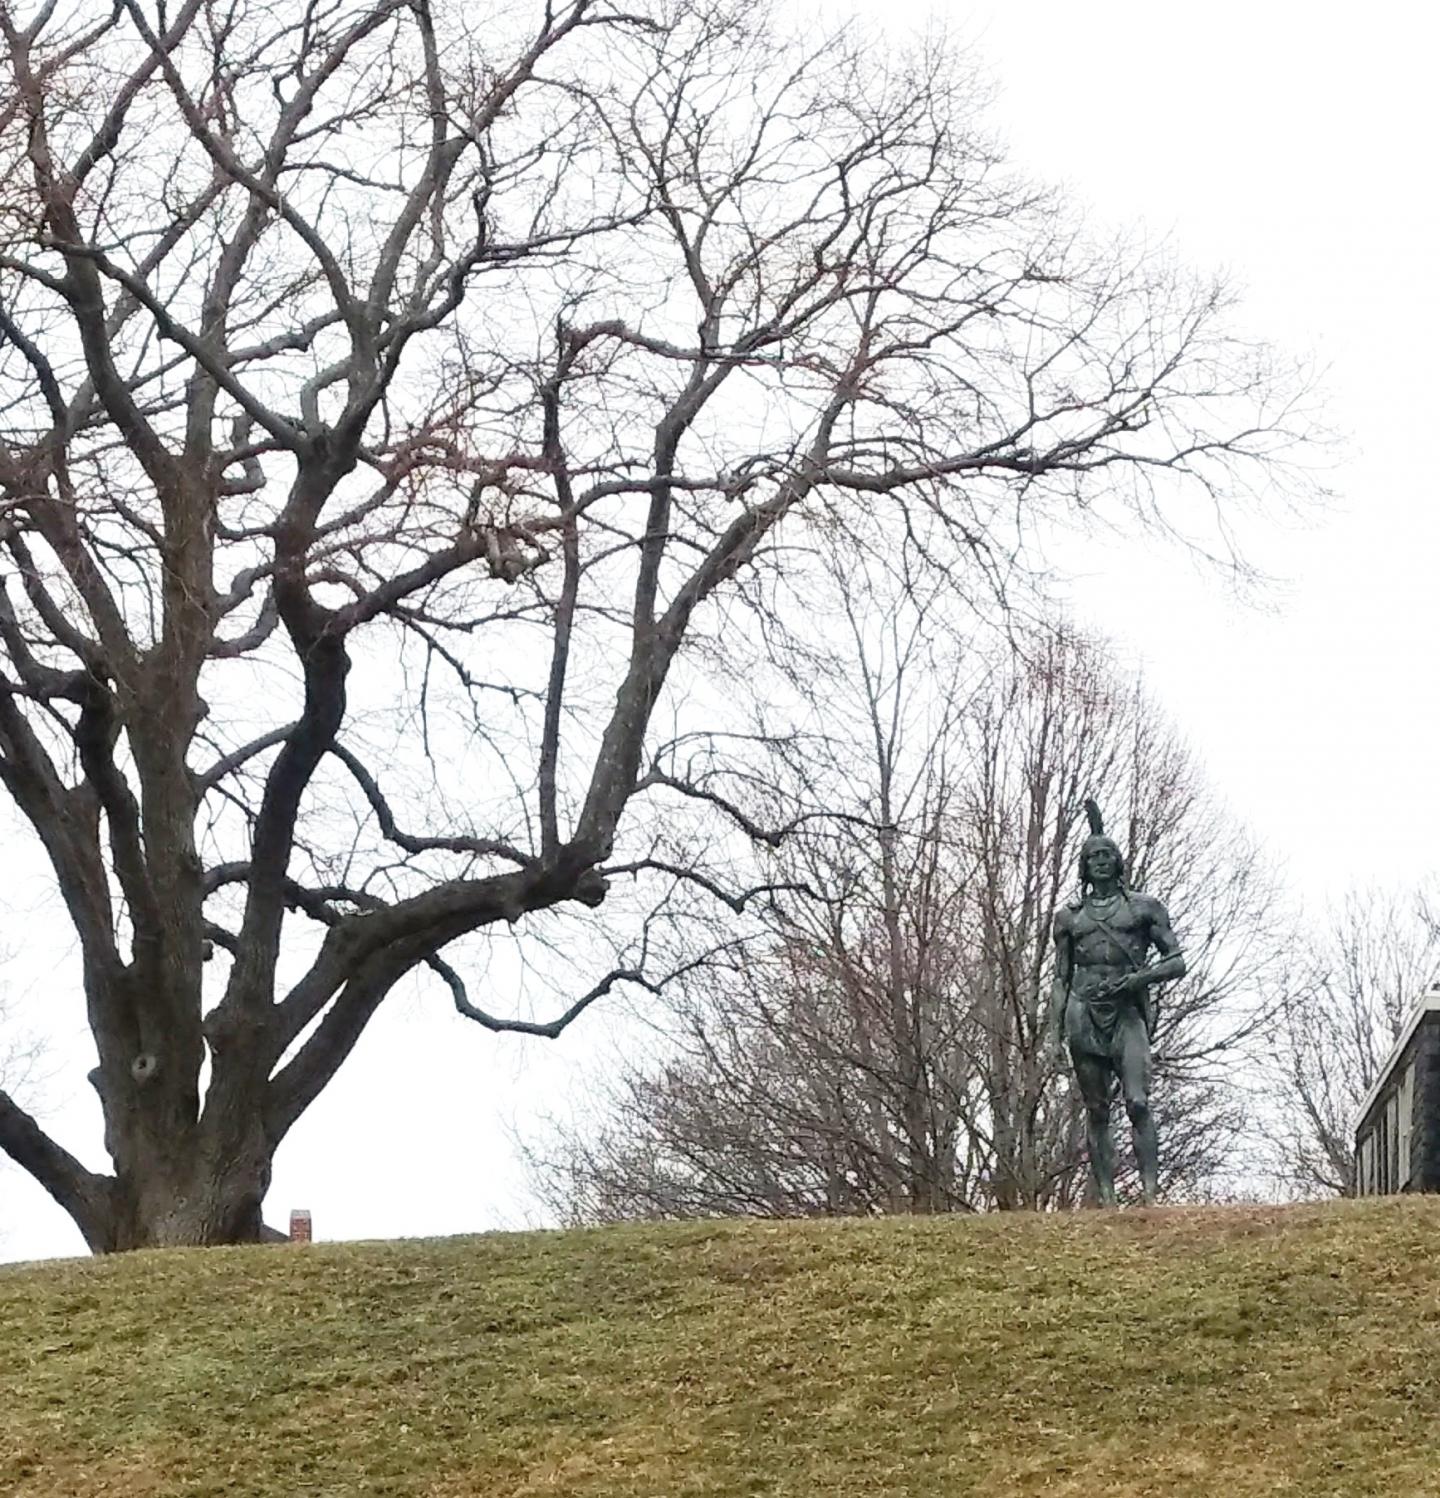 Statue of Massasoit, the Sachem of the Wampanoag when the Pilgrims arrived in 1620, looking out over the Atlantic Coast